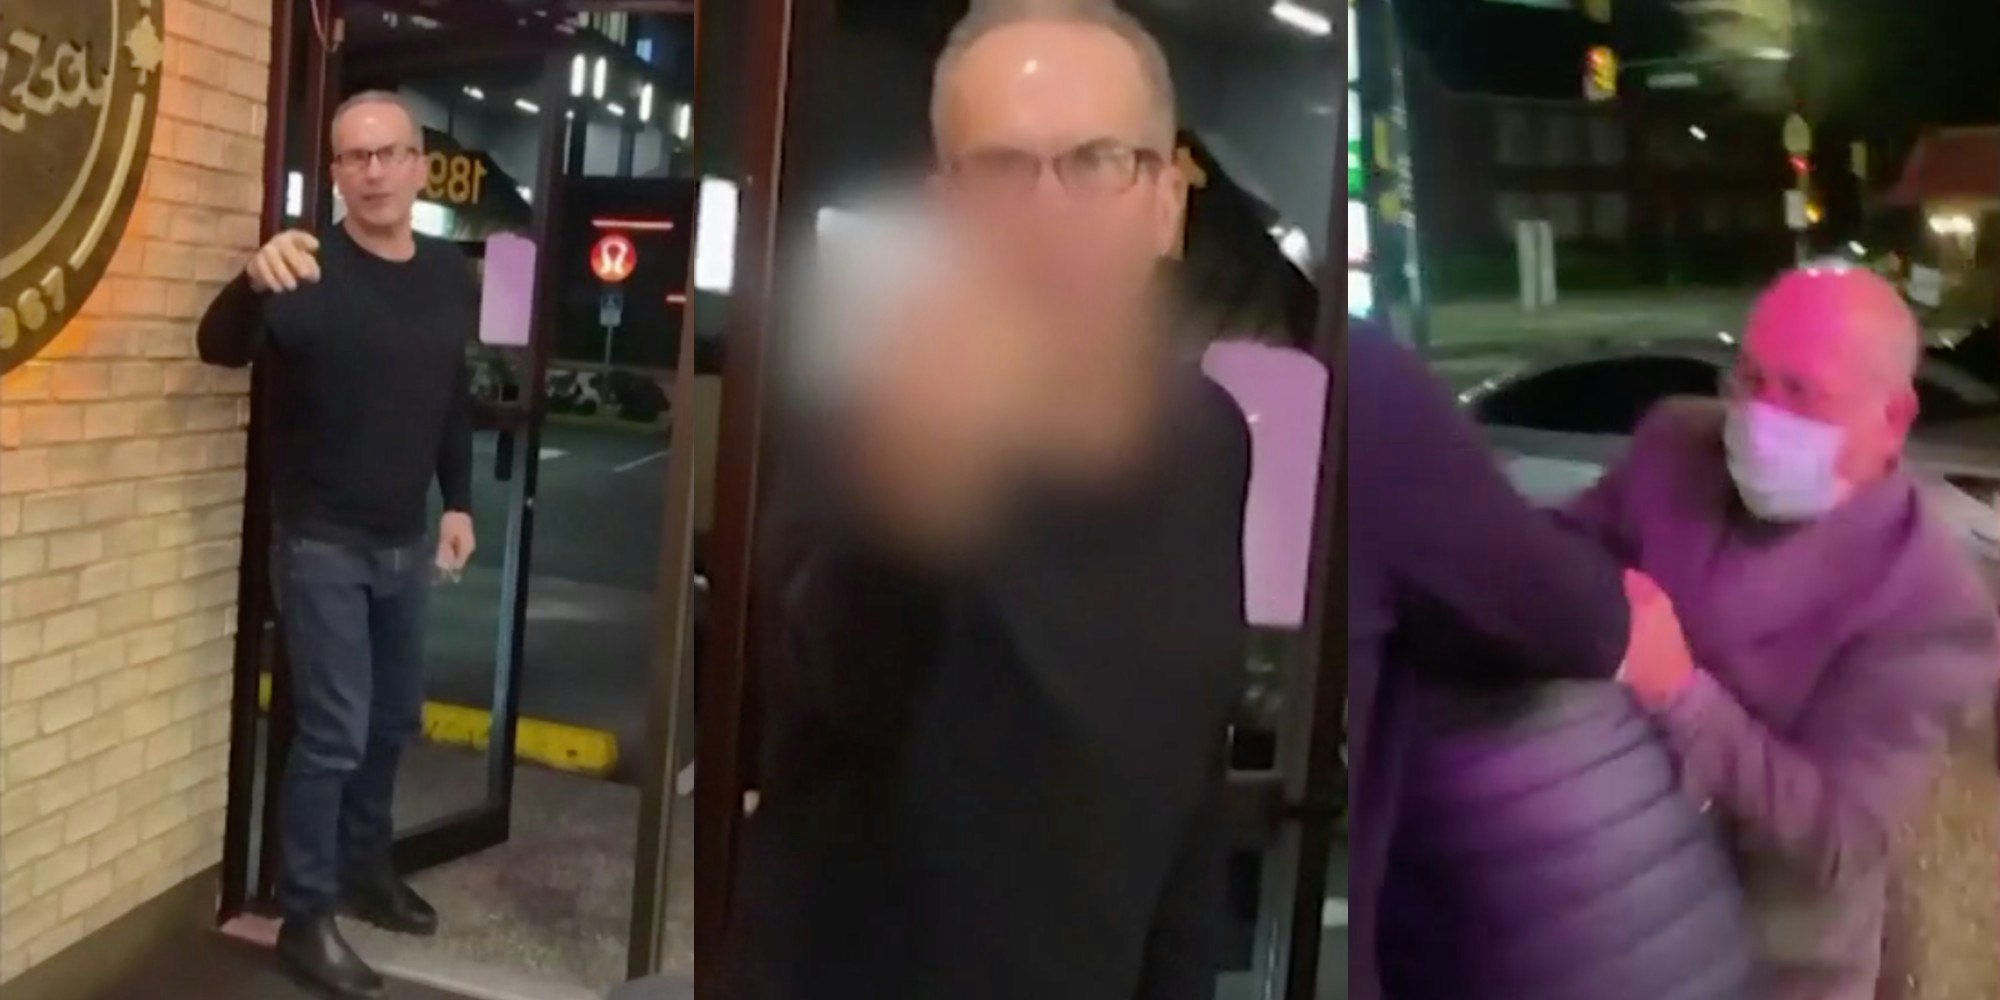 maskless men at pizza pizza yelling at the staff and attacking a teen customer